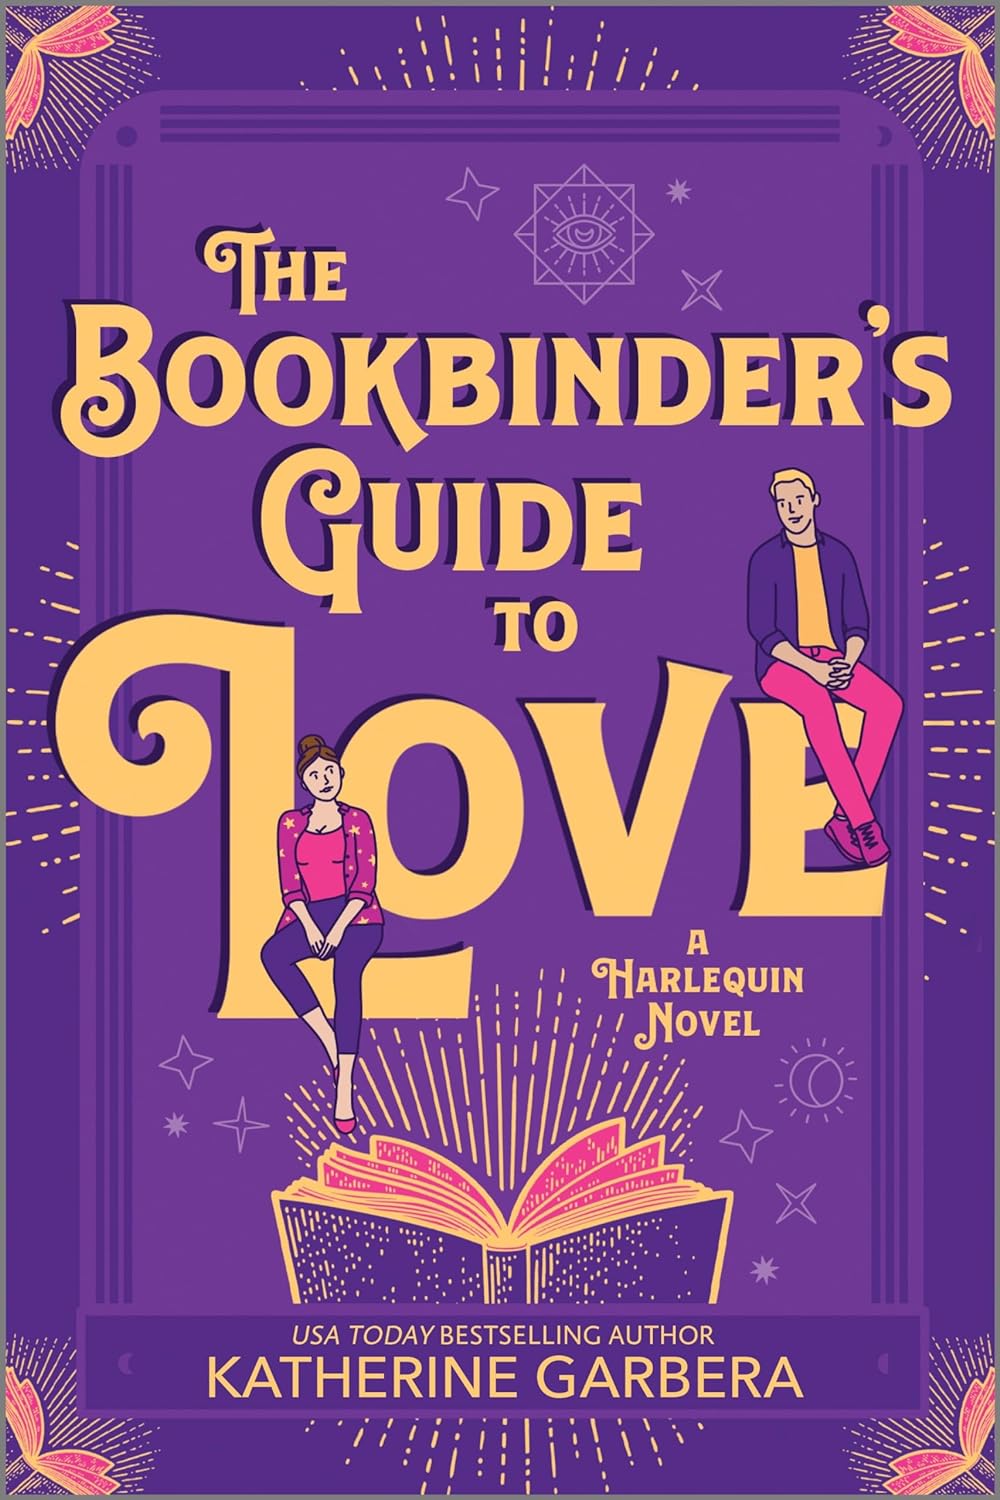 The Bookbinder’s Guide to Love